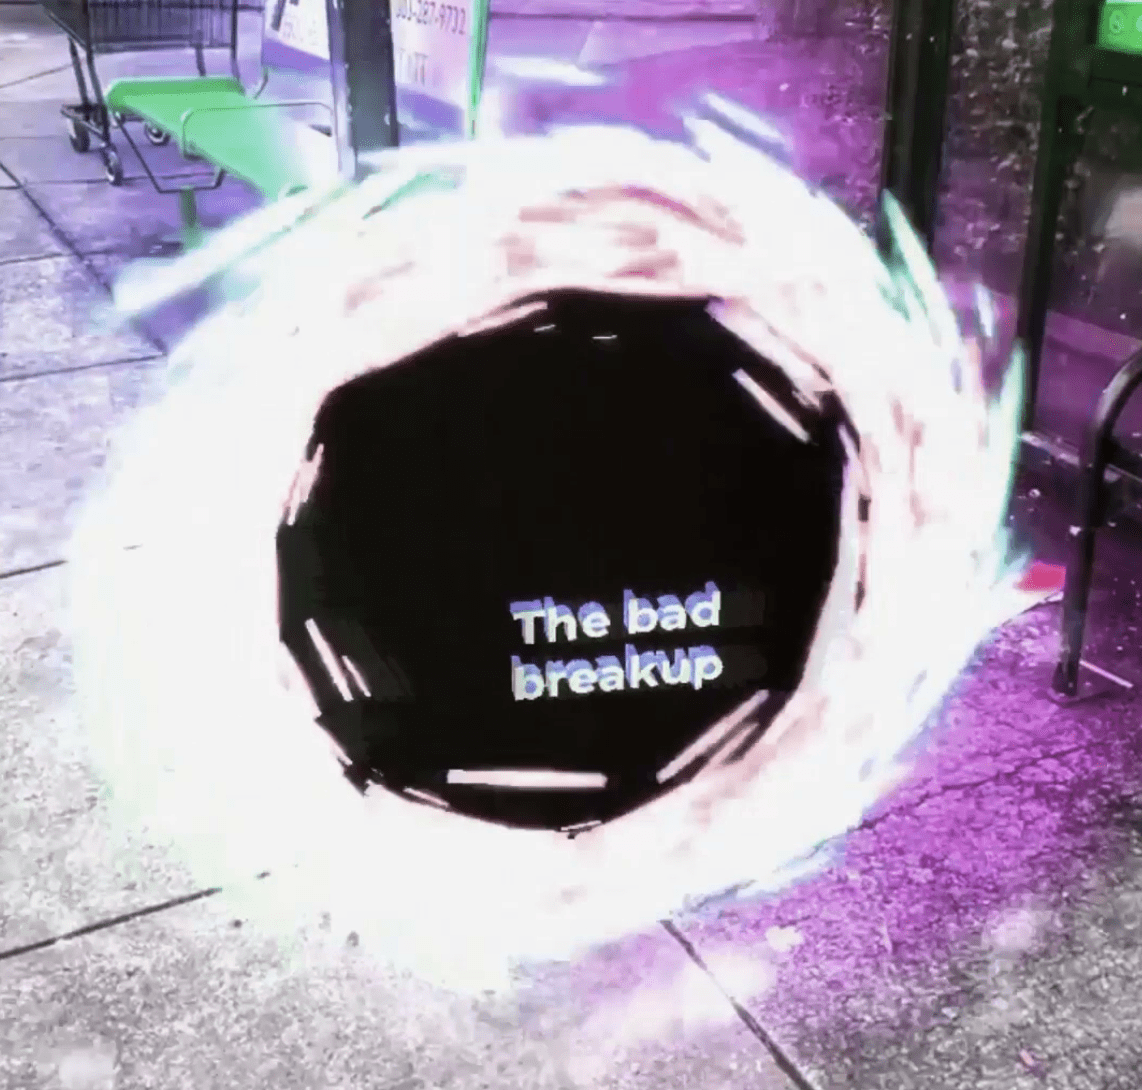 A screenshot of an AR art project. The image shows a sidewalk near a bus stop. Covering most of the scene is a depiction of a black hole, swirling with light around the edges. In the center of the black hole is text reading 